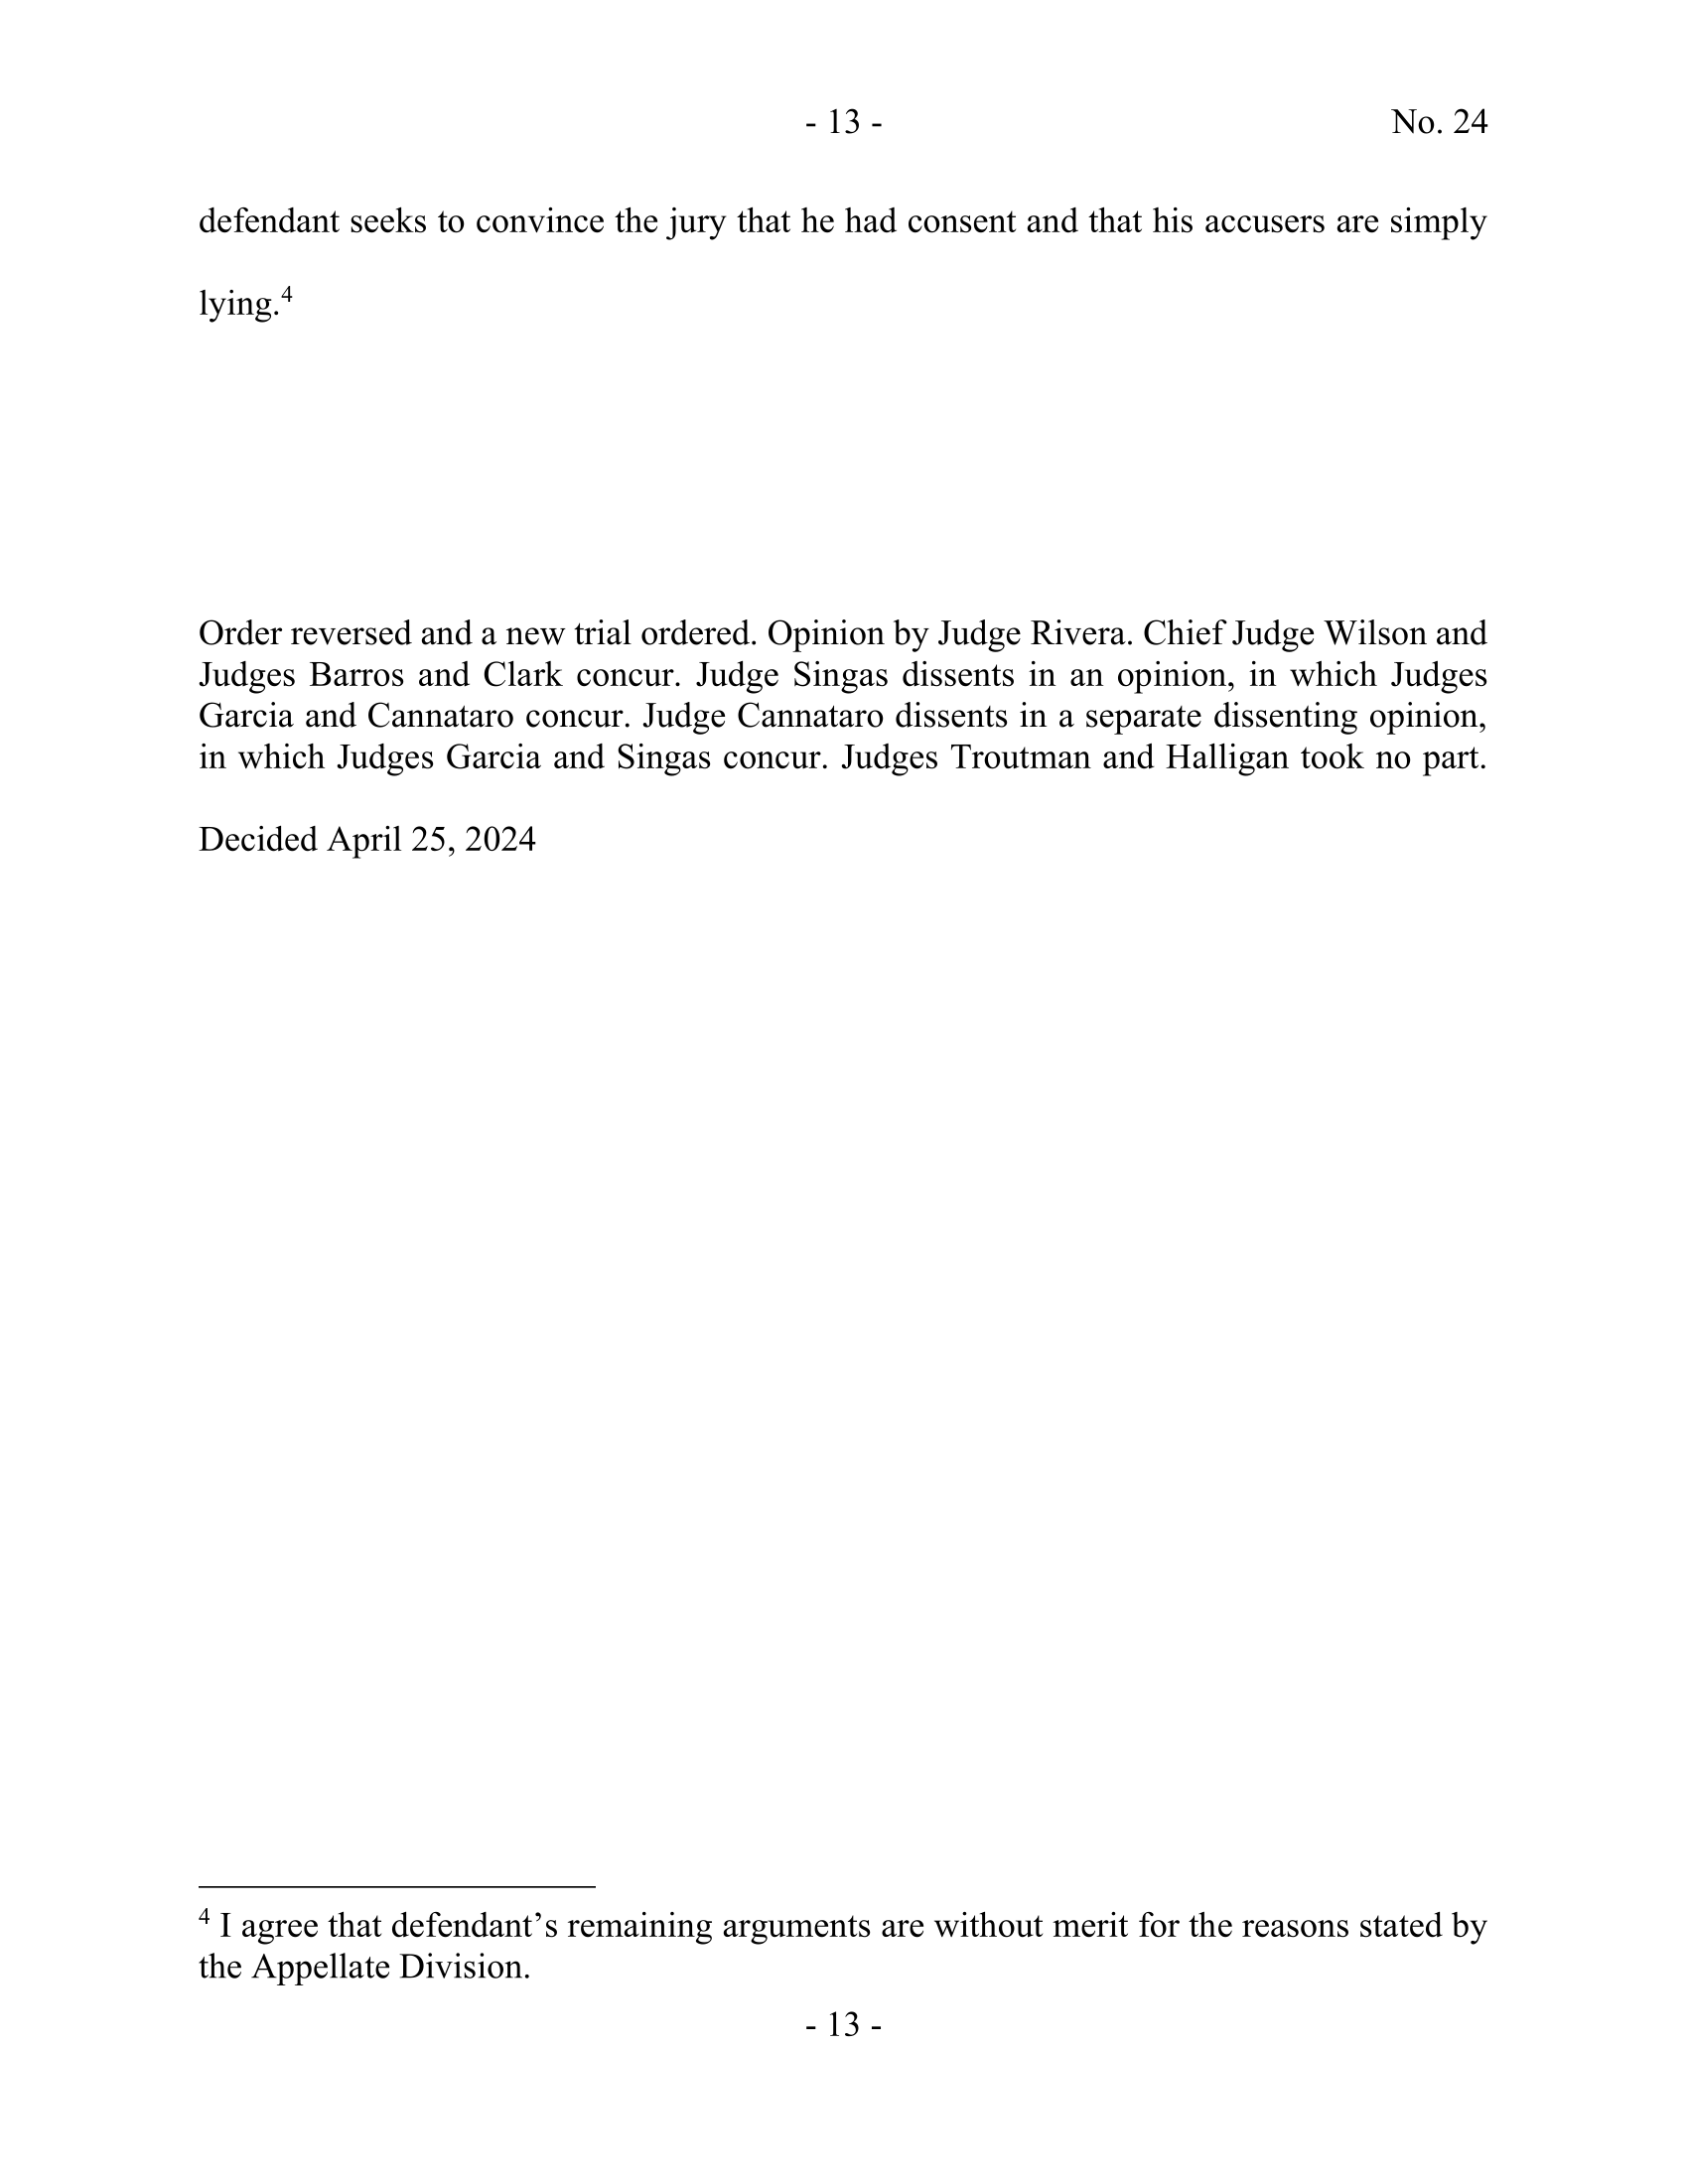 Page 77 of undefined PDF document.